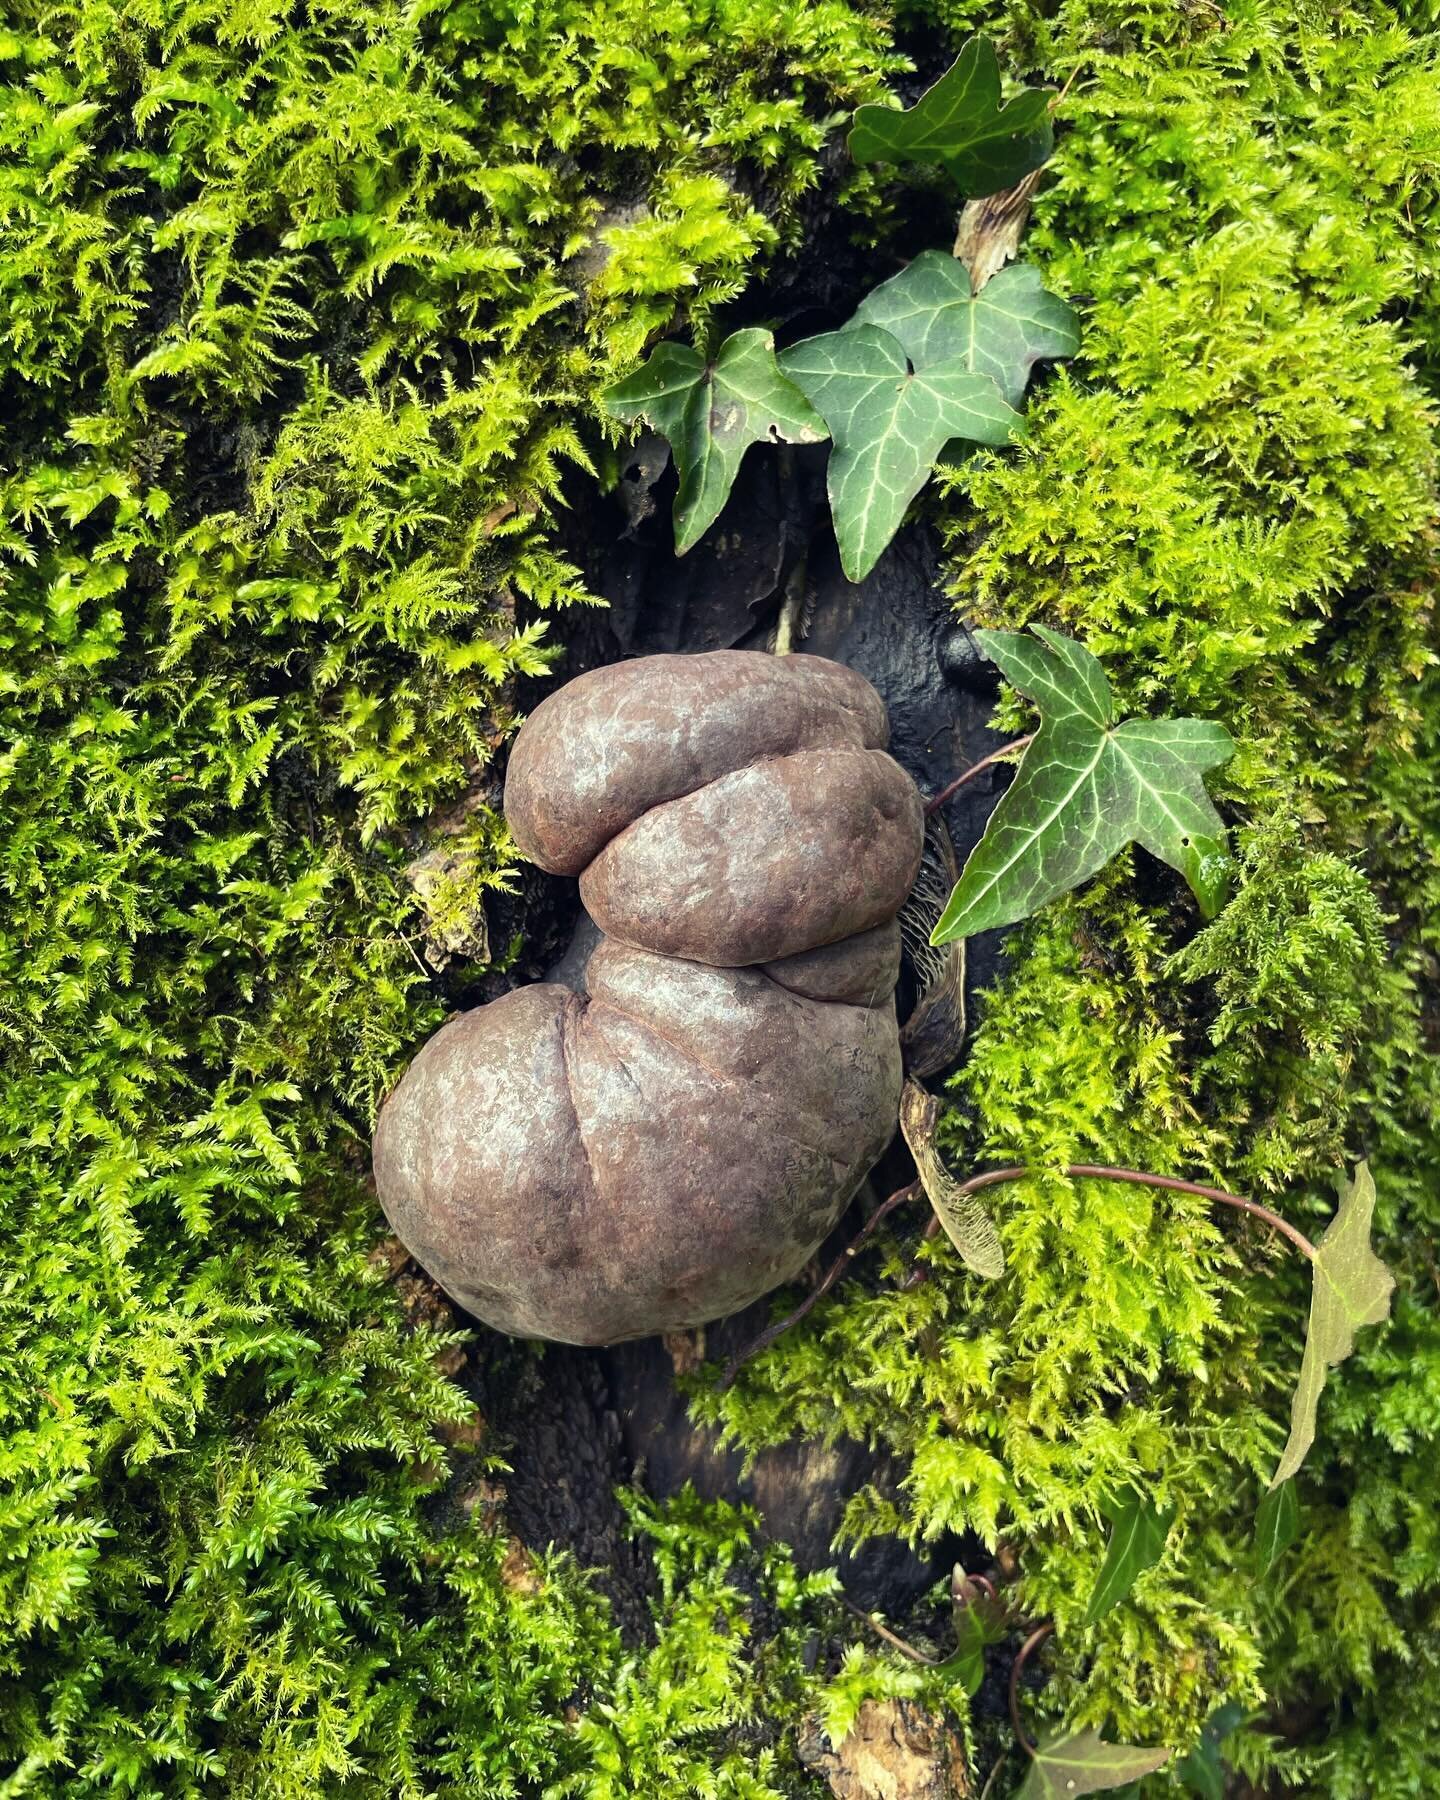 Behold! King Alfred&rsquo;s Cakes! Yep, I know it looks like a 💩 but I am reliably informed by the @woodlandtrust that it is in fact a fungus! Check out their website to learn more about how it got its weird and wonderful name 🤓
Swipe to see some v